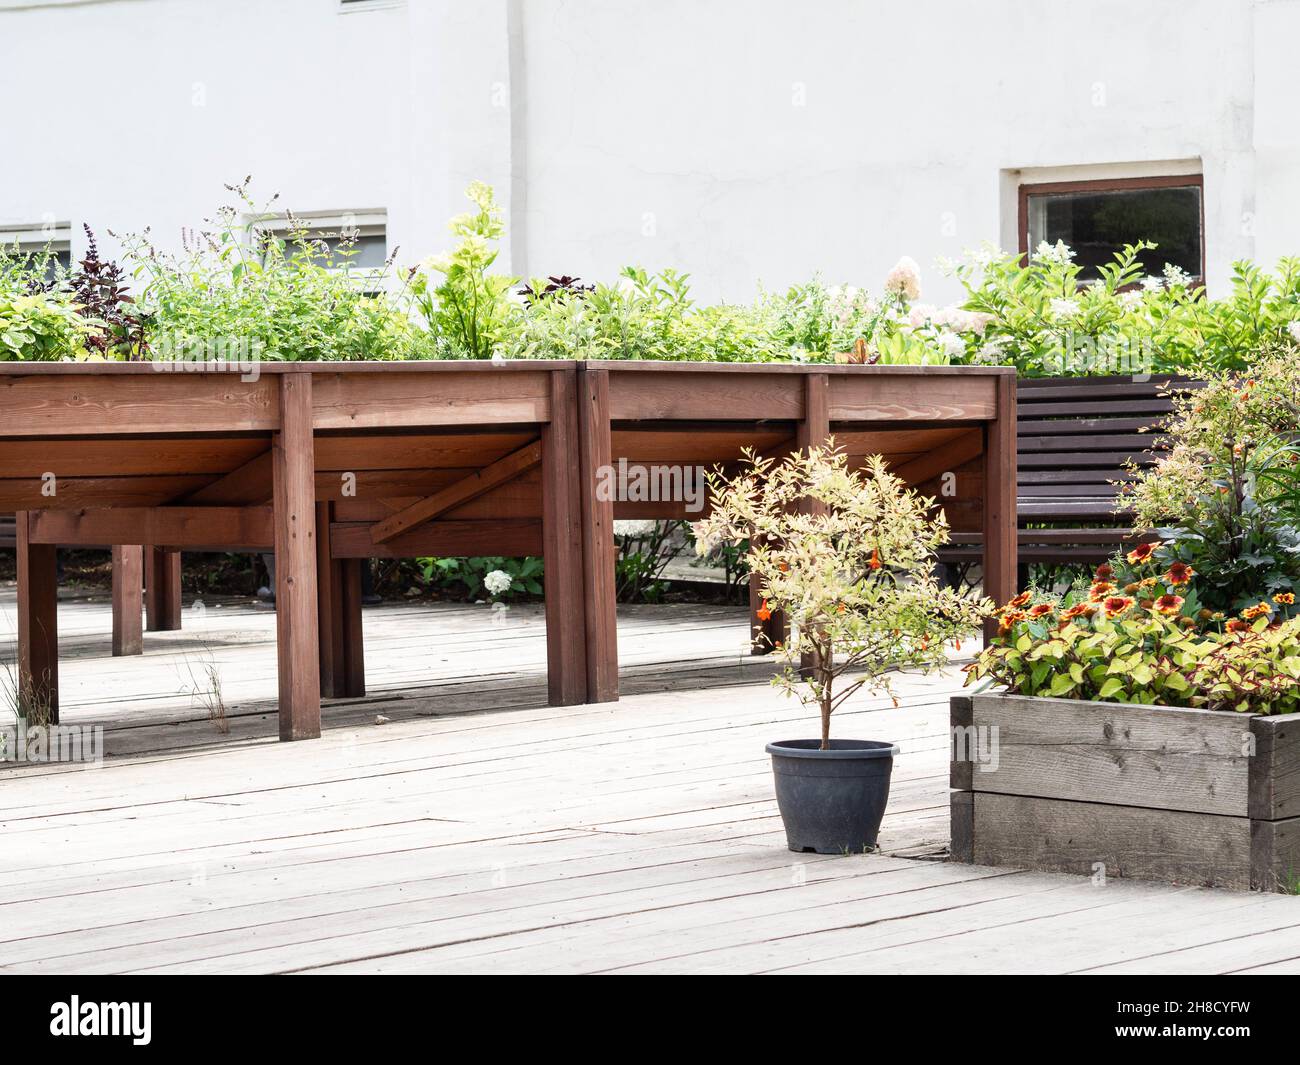 High raised wooden bed with various herbs in the city garden. Eco gardening in urban setting Stock Photo